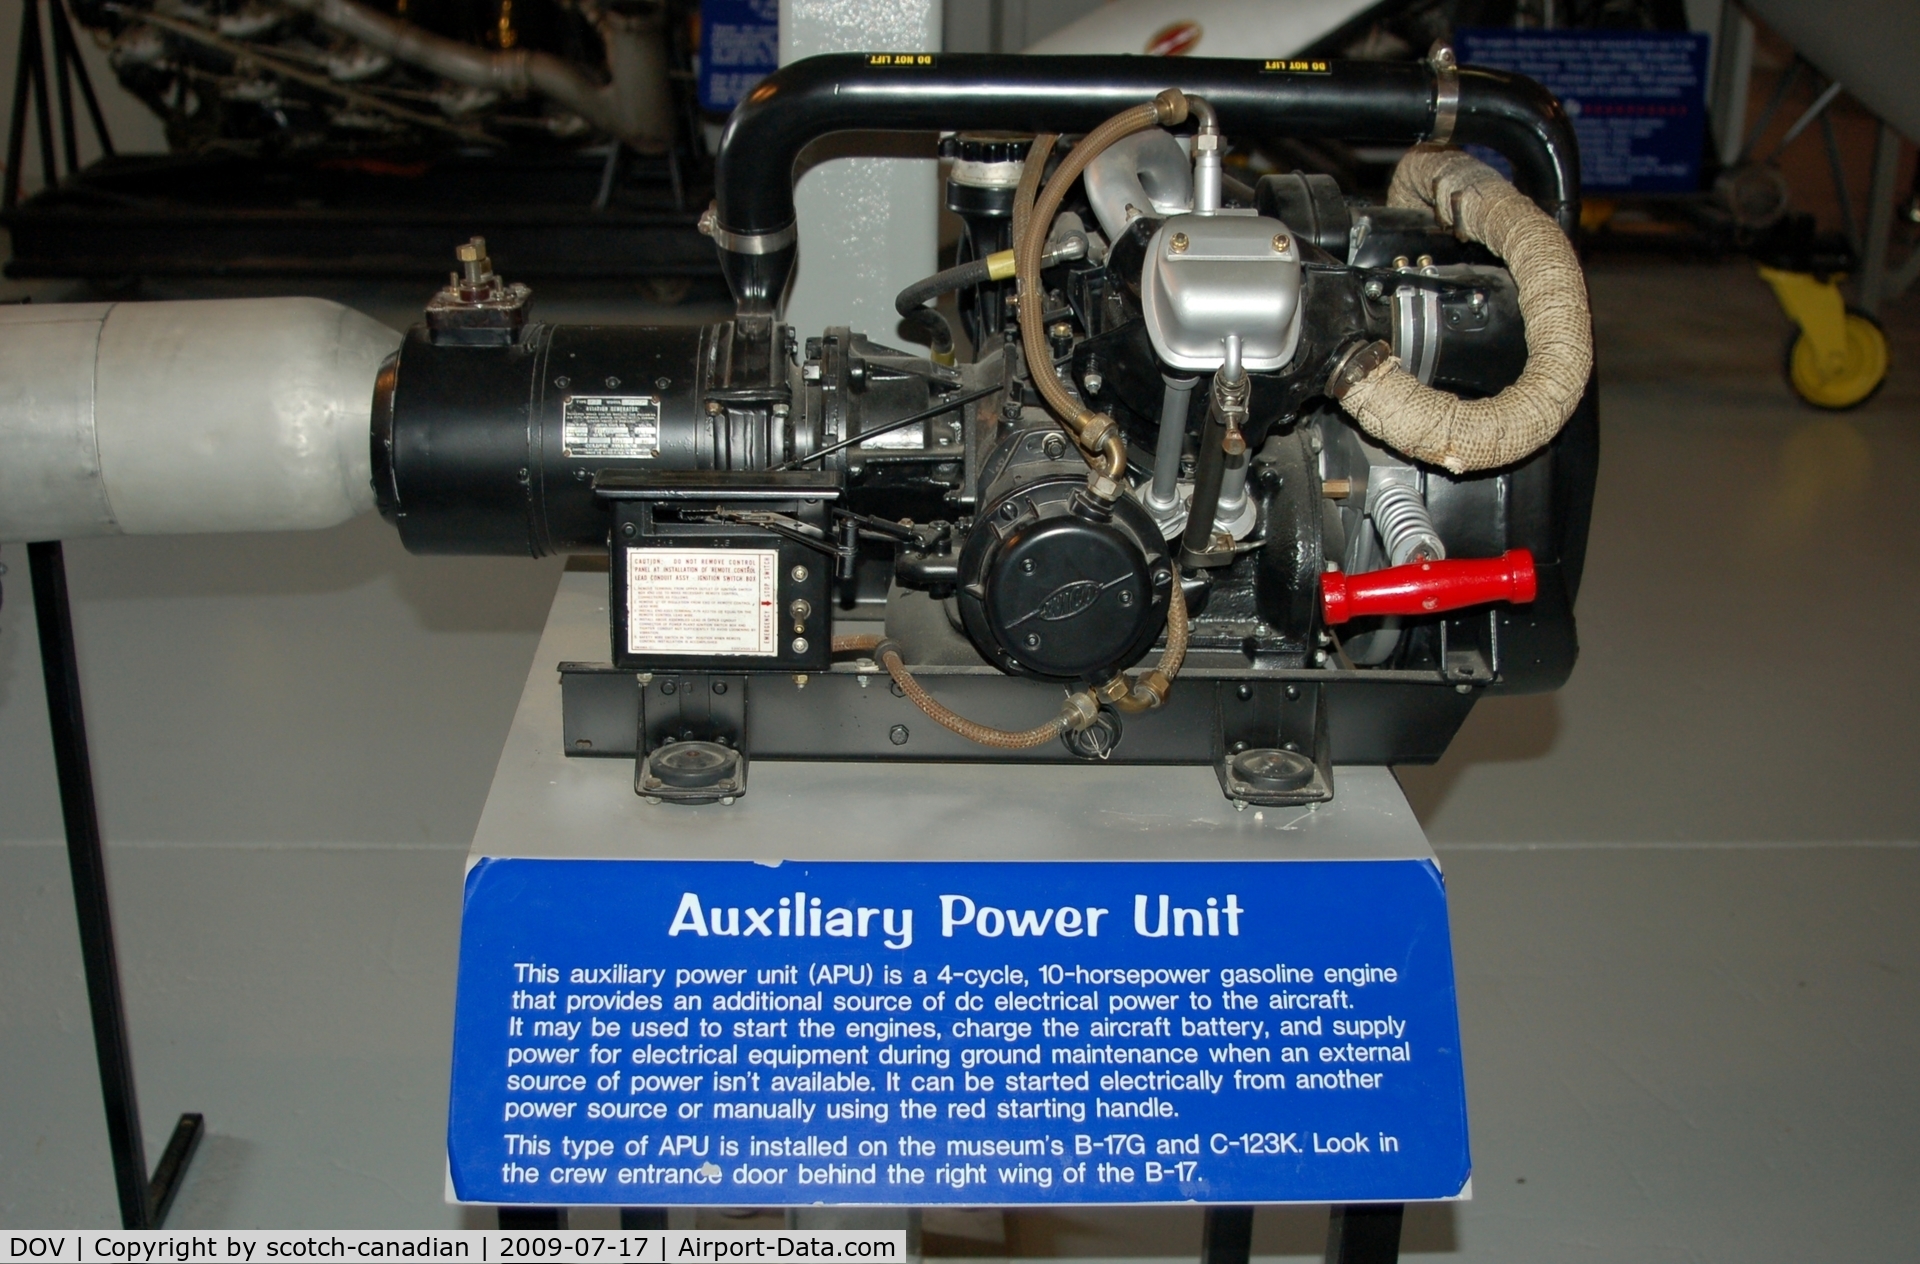 Dover Afb Airport (DOV) - Auxiliary Power Unit at the Air Mobility Command Museum, Dover AFB, DE